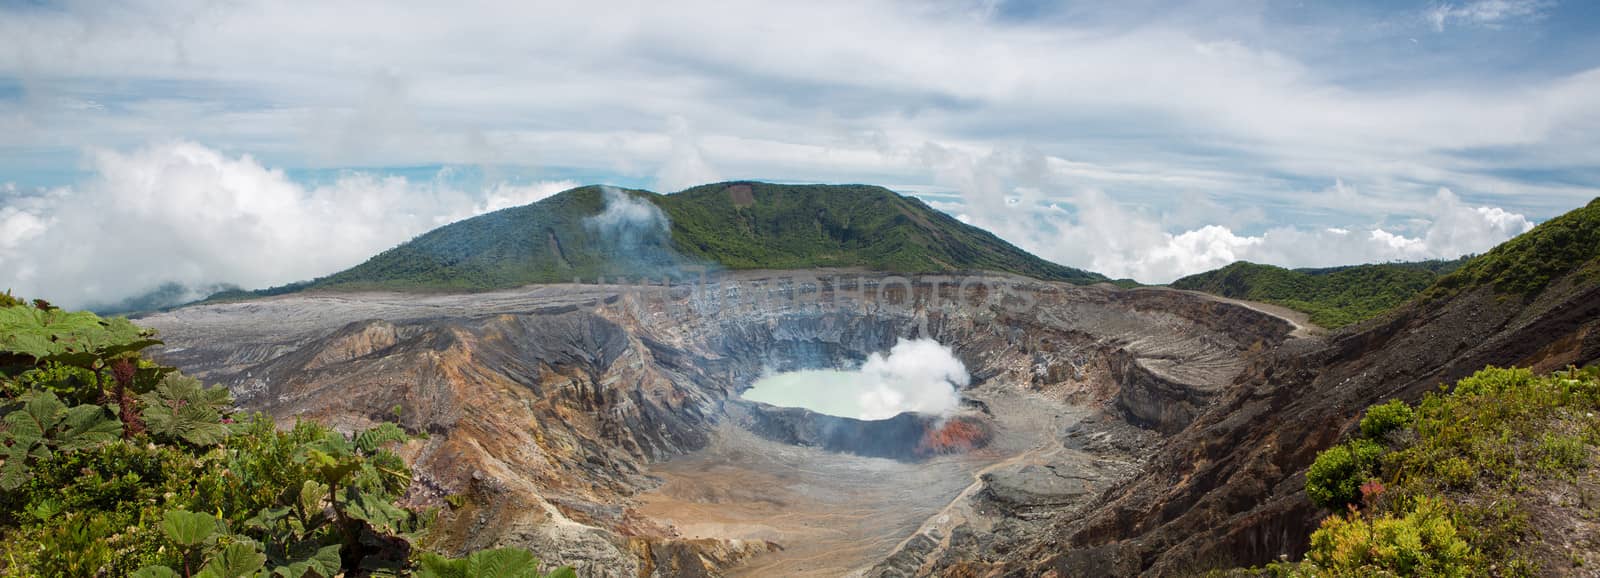 Panoramic view of  fumarole smoke over the Poas Volcano in Costa Rica in 2012. Detail of the acid water crater with turquoise colors.